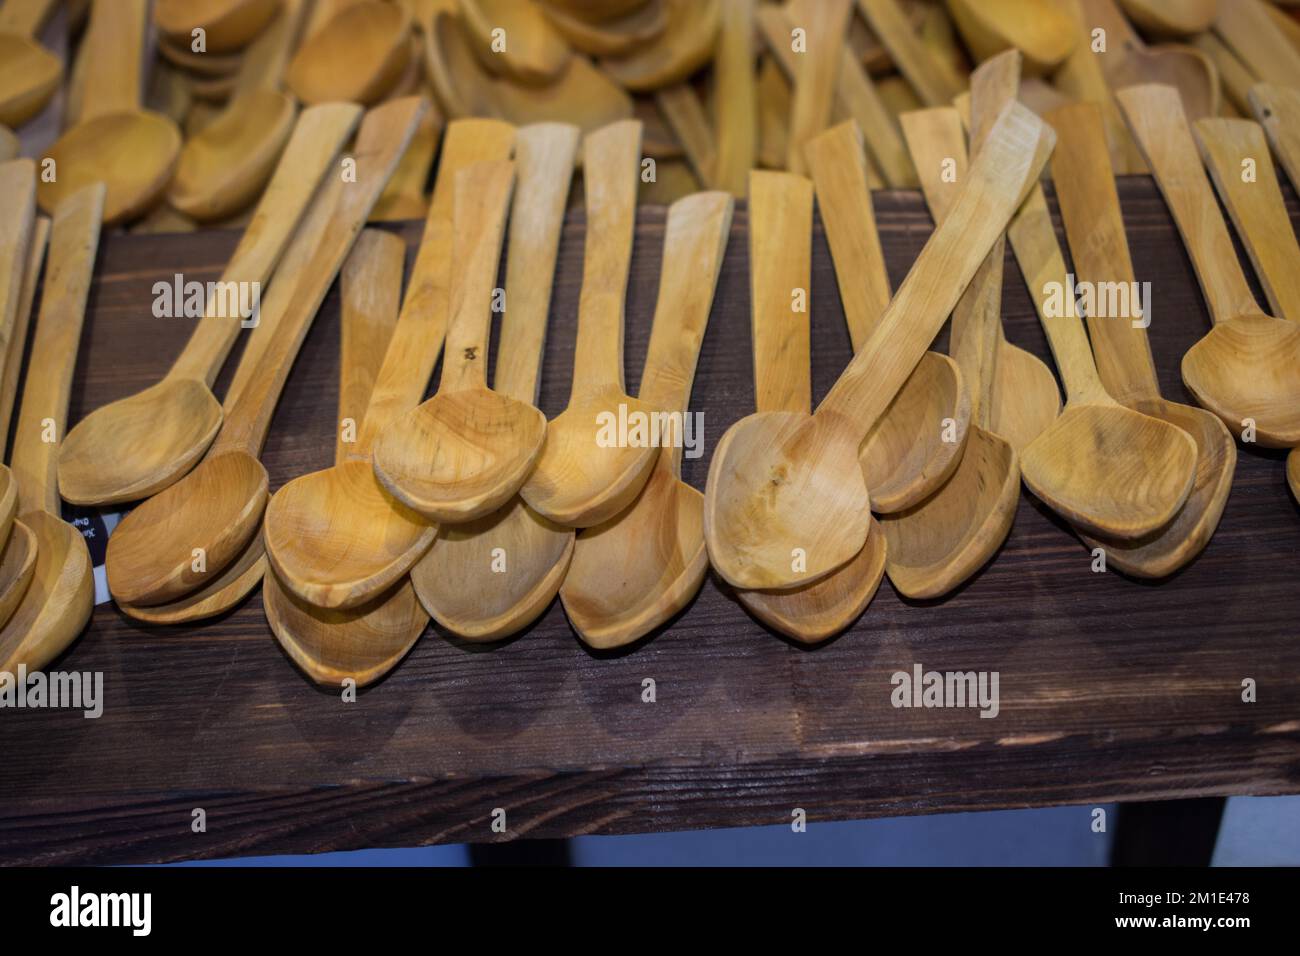 Dozens of soup spoon or tablespoon made of wood Stock Photo